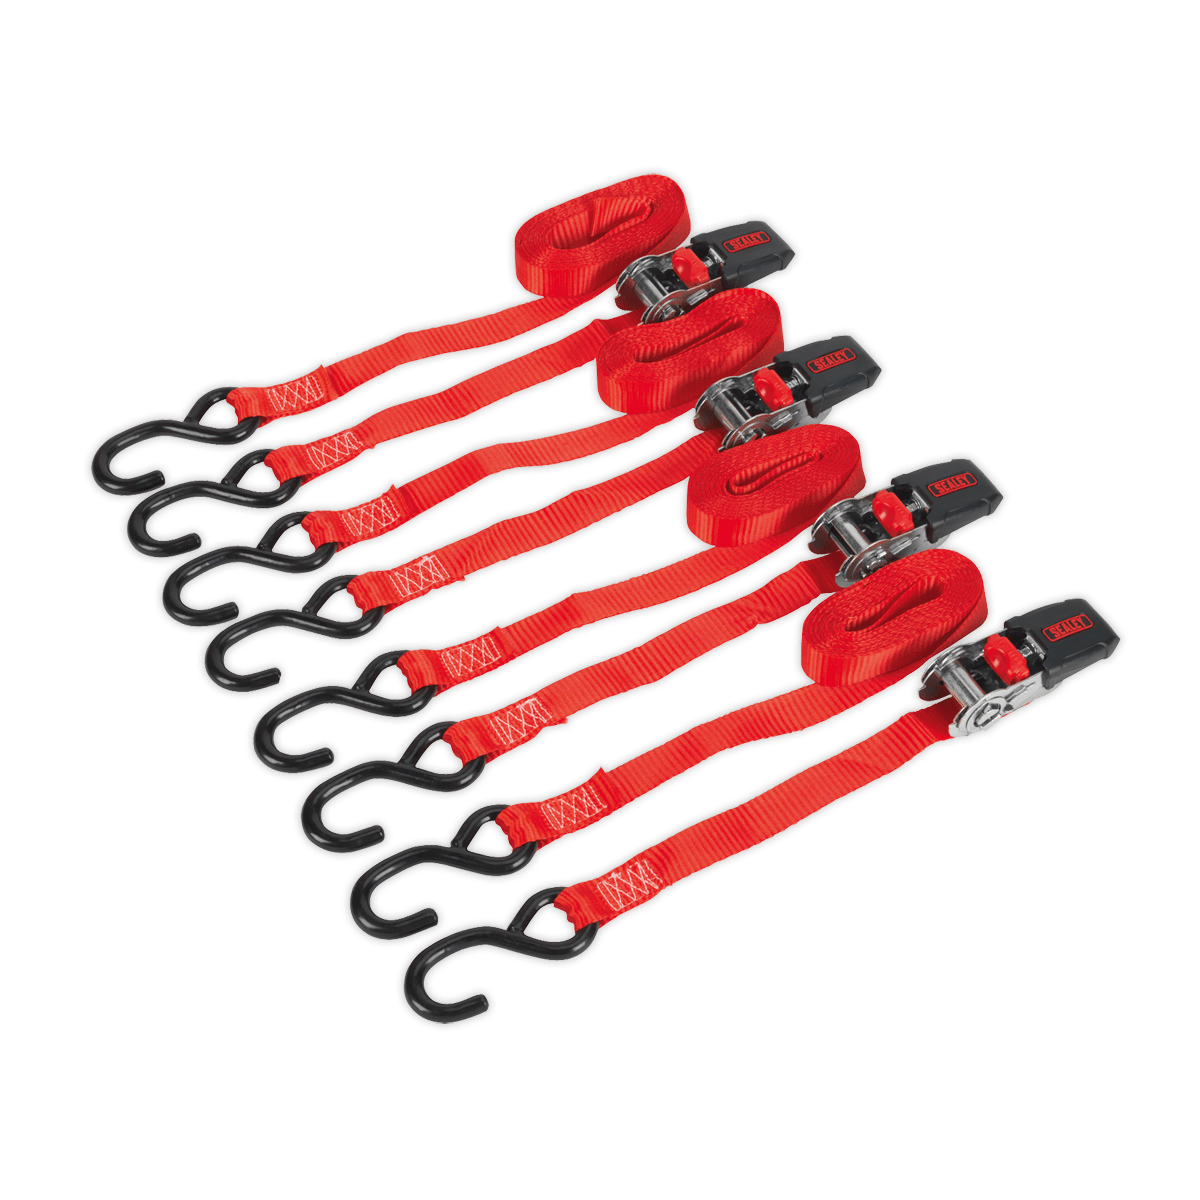 Sealey Ratchet Strap 25mm x 4m Polyester Webbing with S-Hooks 800kg Breaking Strength - 2 Pairs